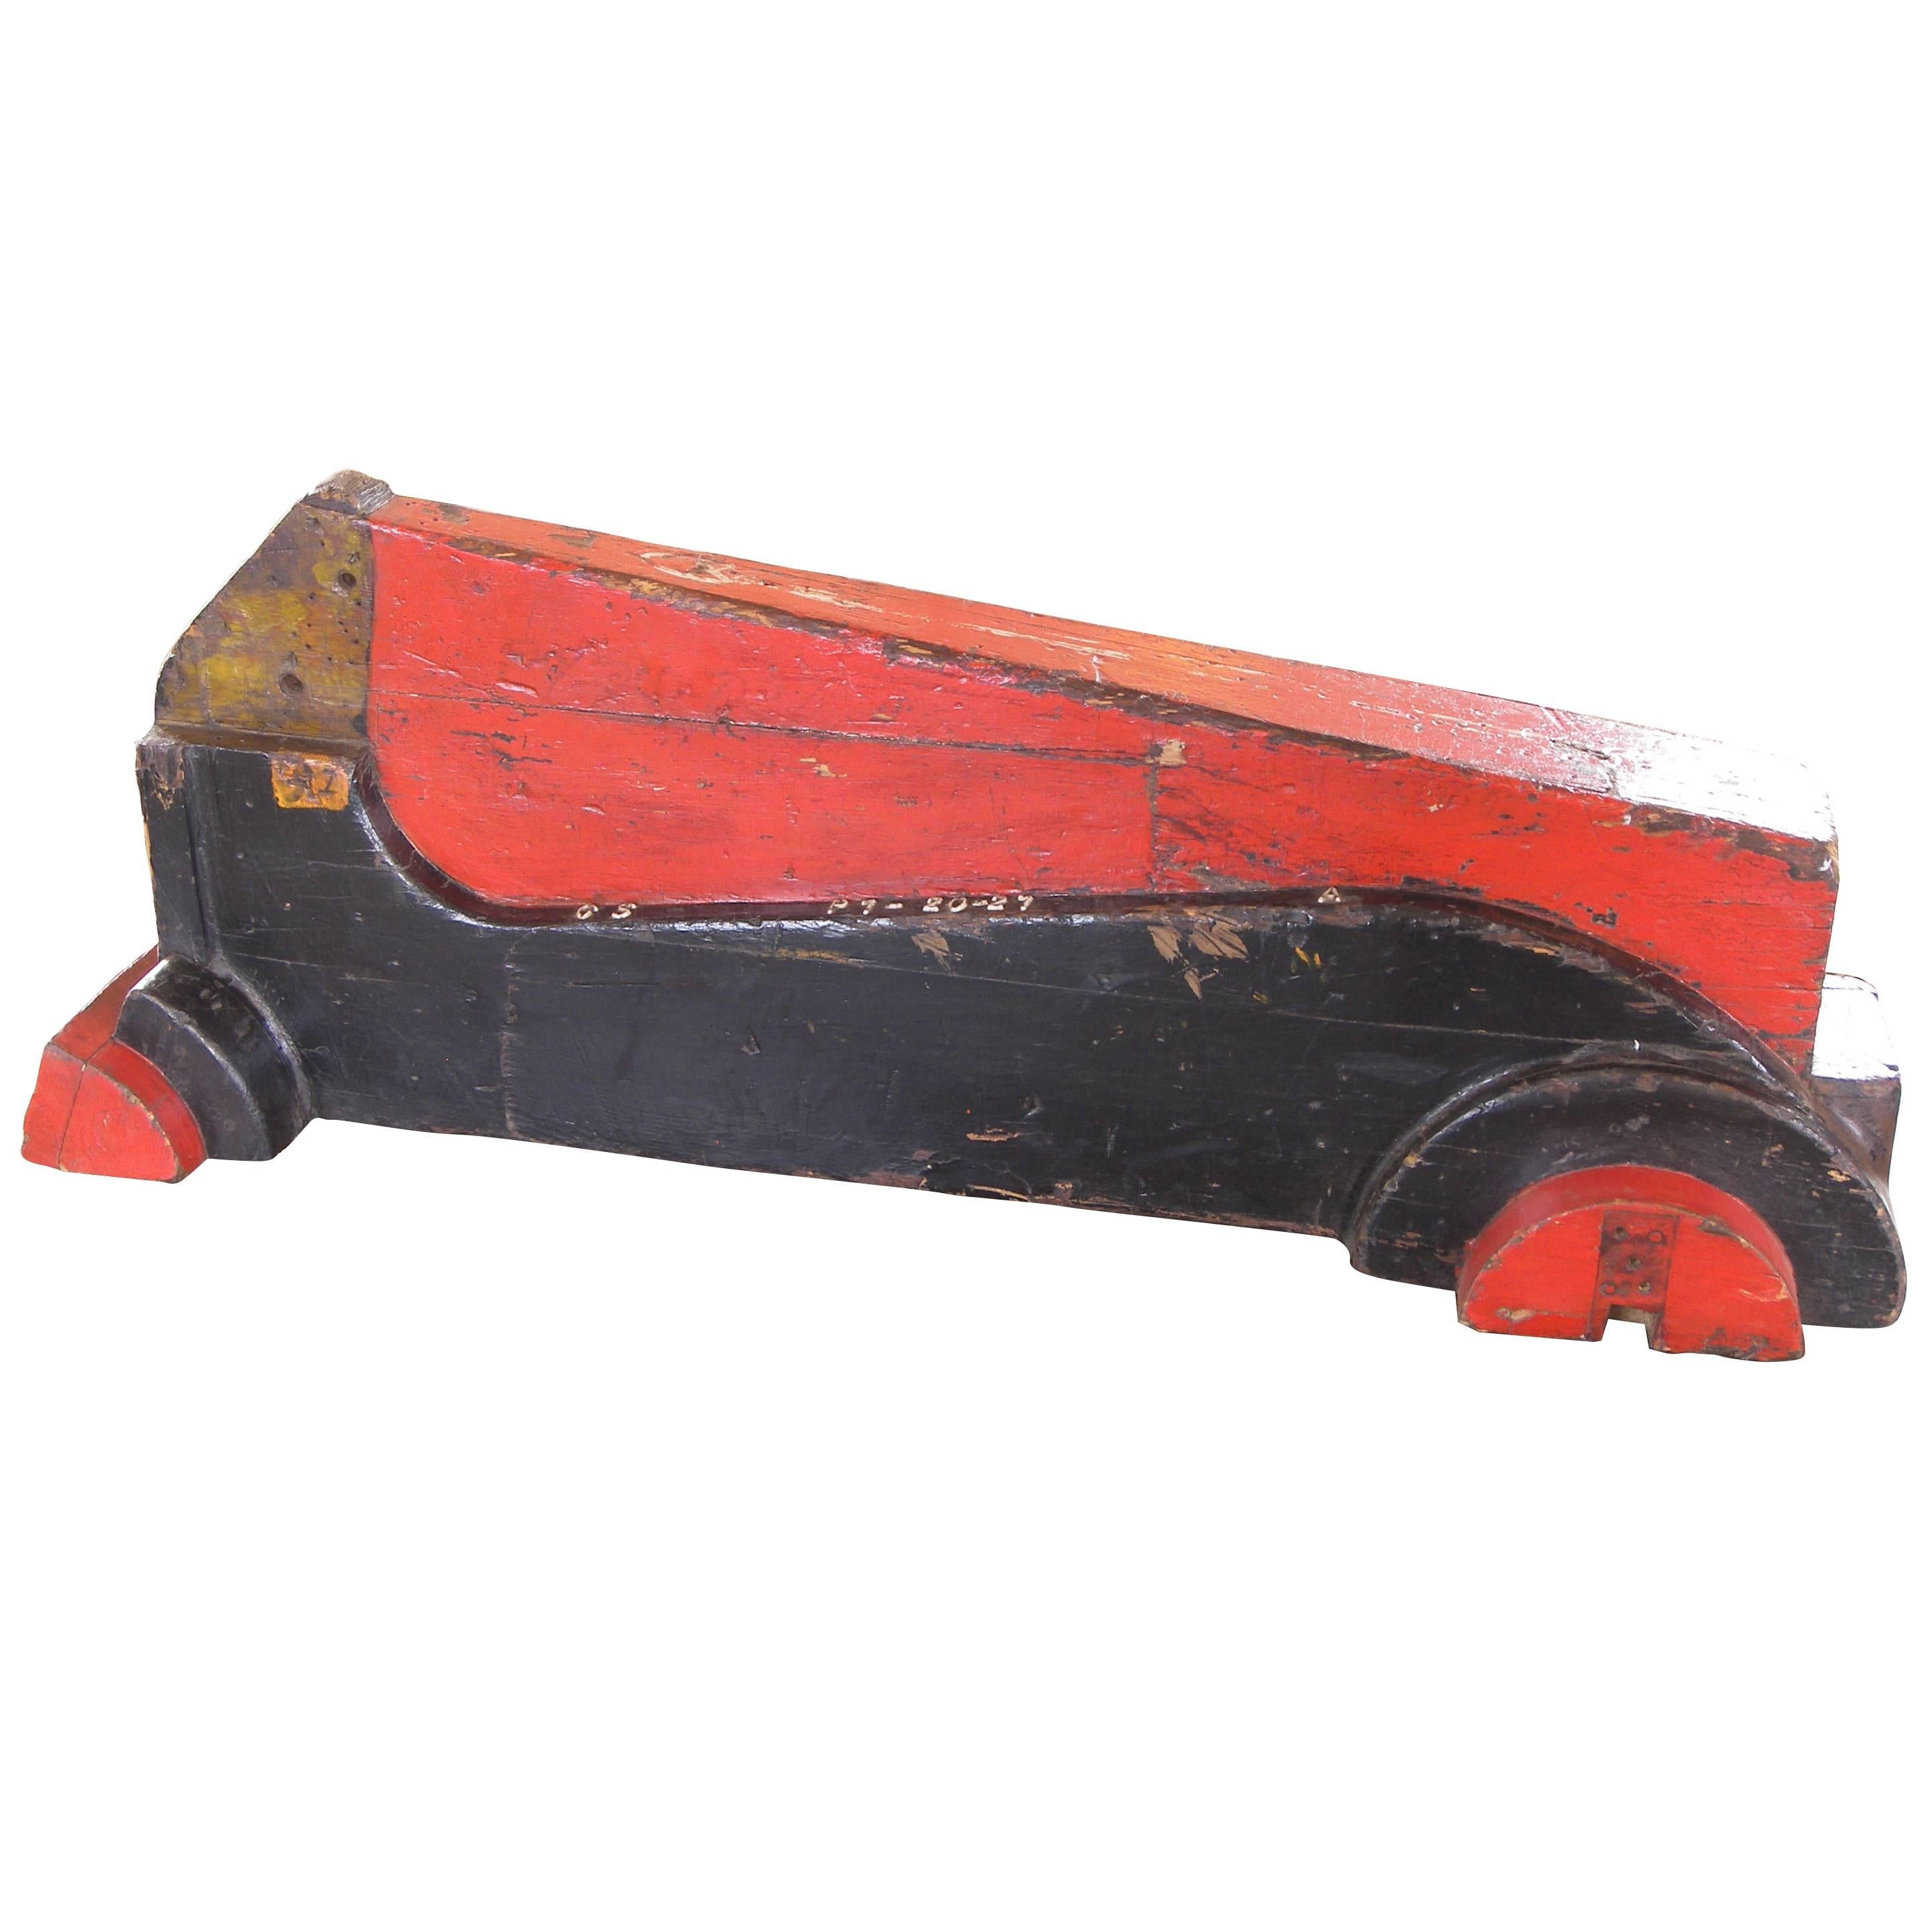 Vintage Wooden Factory Racing Car Art Toy Mold / Pattern